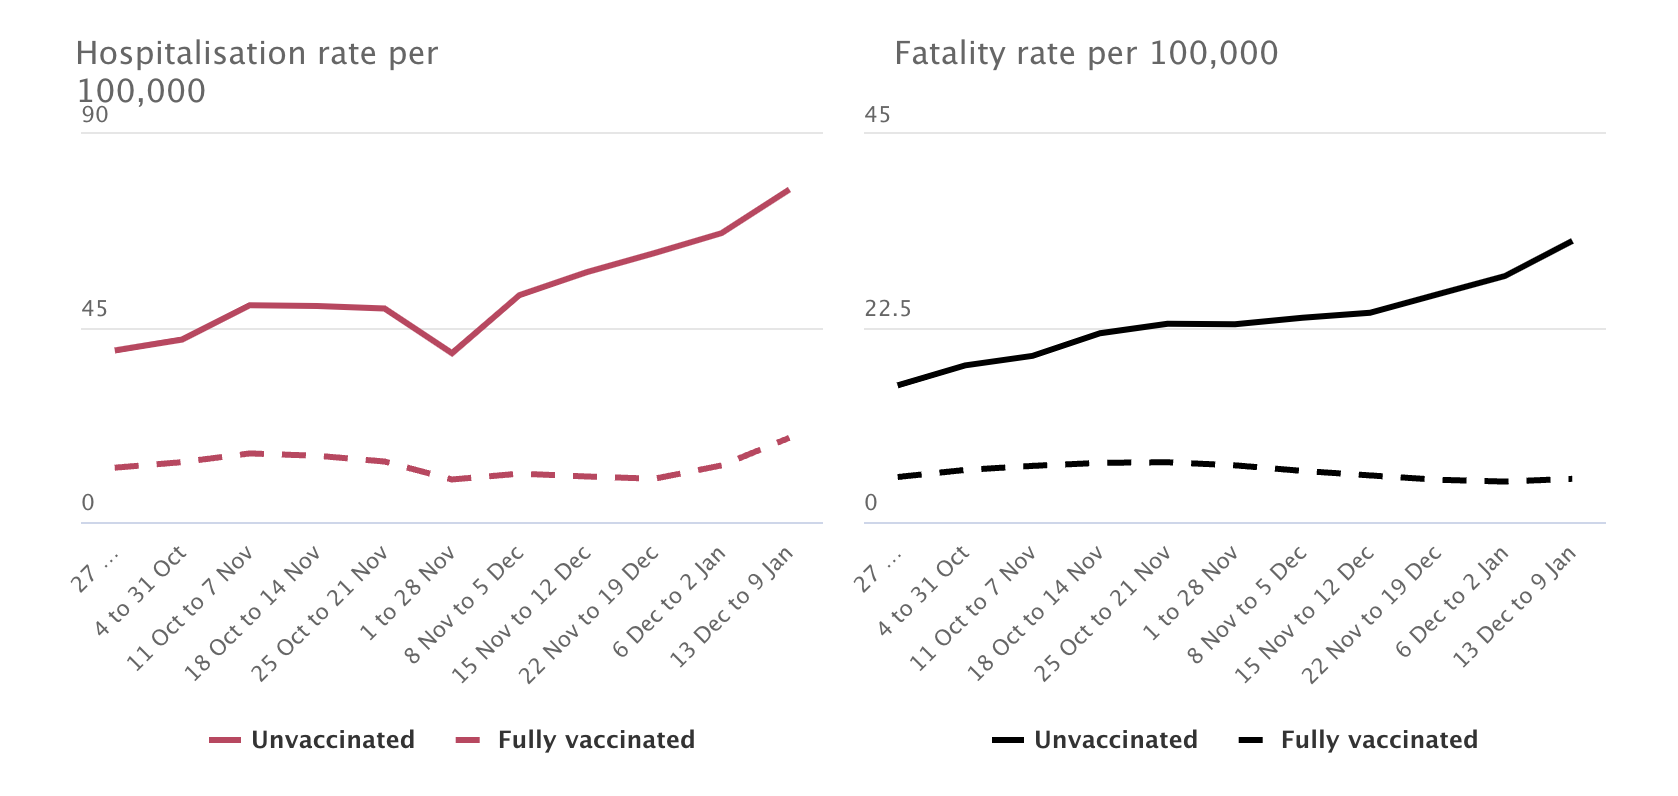 England hospital admissions (1a) and death (1b) rates per 100,000, split between the unvaccinated and fully vaccinated